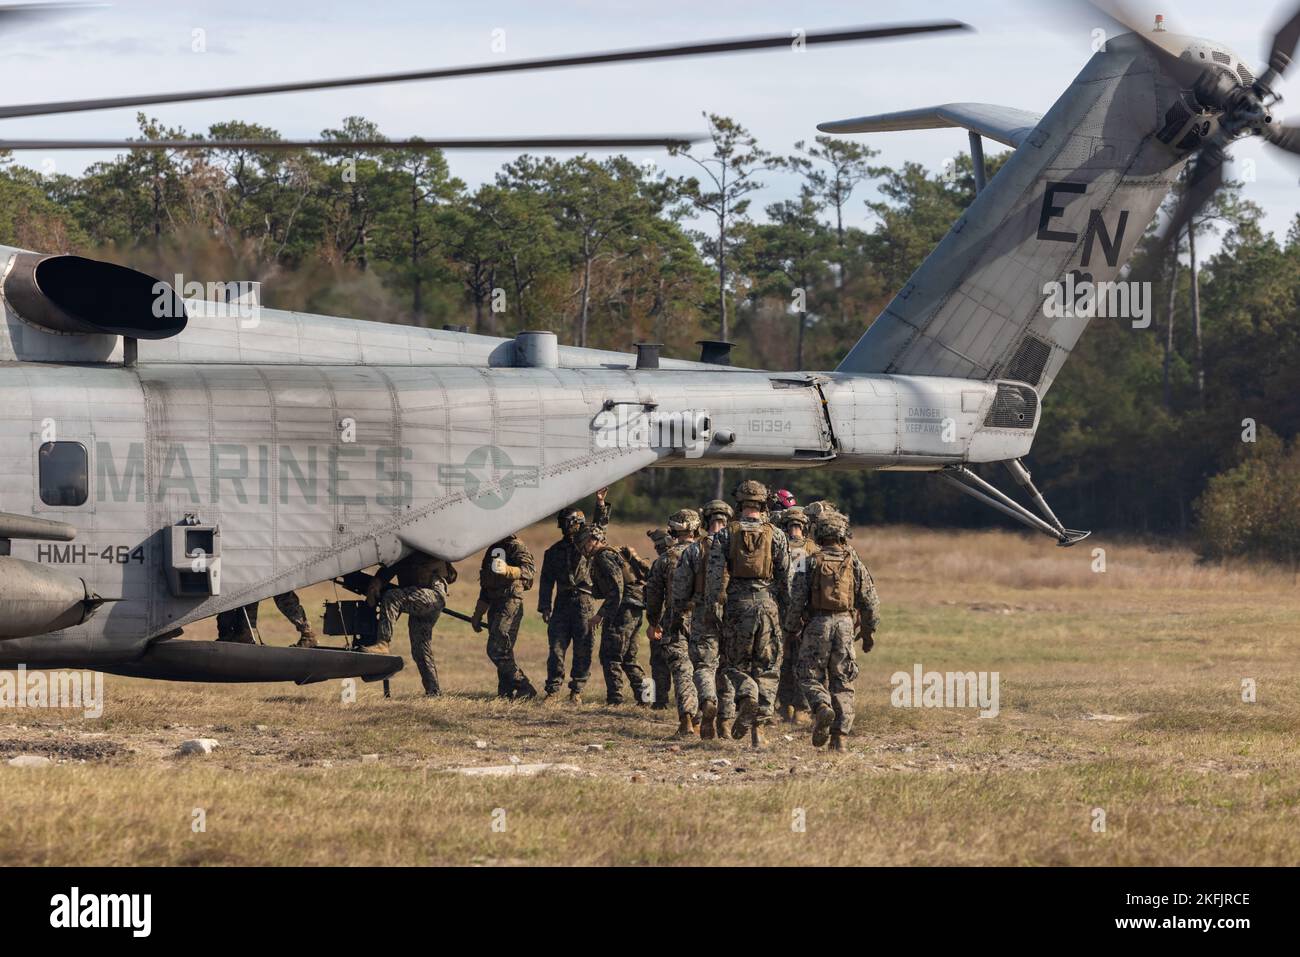 U.S. Marines with the Maritime Special Purpose Force, 26th Marine Expeditionary Unit (MEU), load into a CH-53E Super Stallion helicopter during a Fast Rope Masters course at Stone Bay, on Marine Corps Base Camp Lejeune, North Carolina, Nov. 16, 2022. This training prepares service members for helicopter-borne insertion and extraction operations and certifies them to oversee rope operations with their respective units. The Fast Rope Masters course is one of several Expeditionary Operations Training Group taught courses Marines and Sailors of the MEU receive prior to deployment. (U.S. Marine Cor Stock Photo